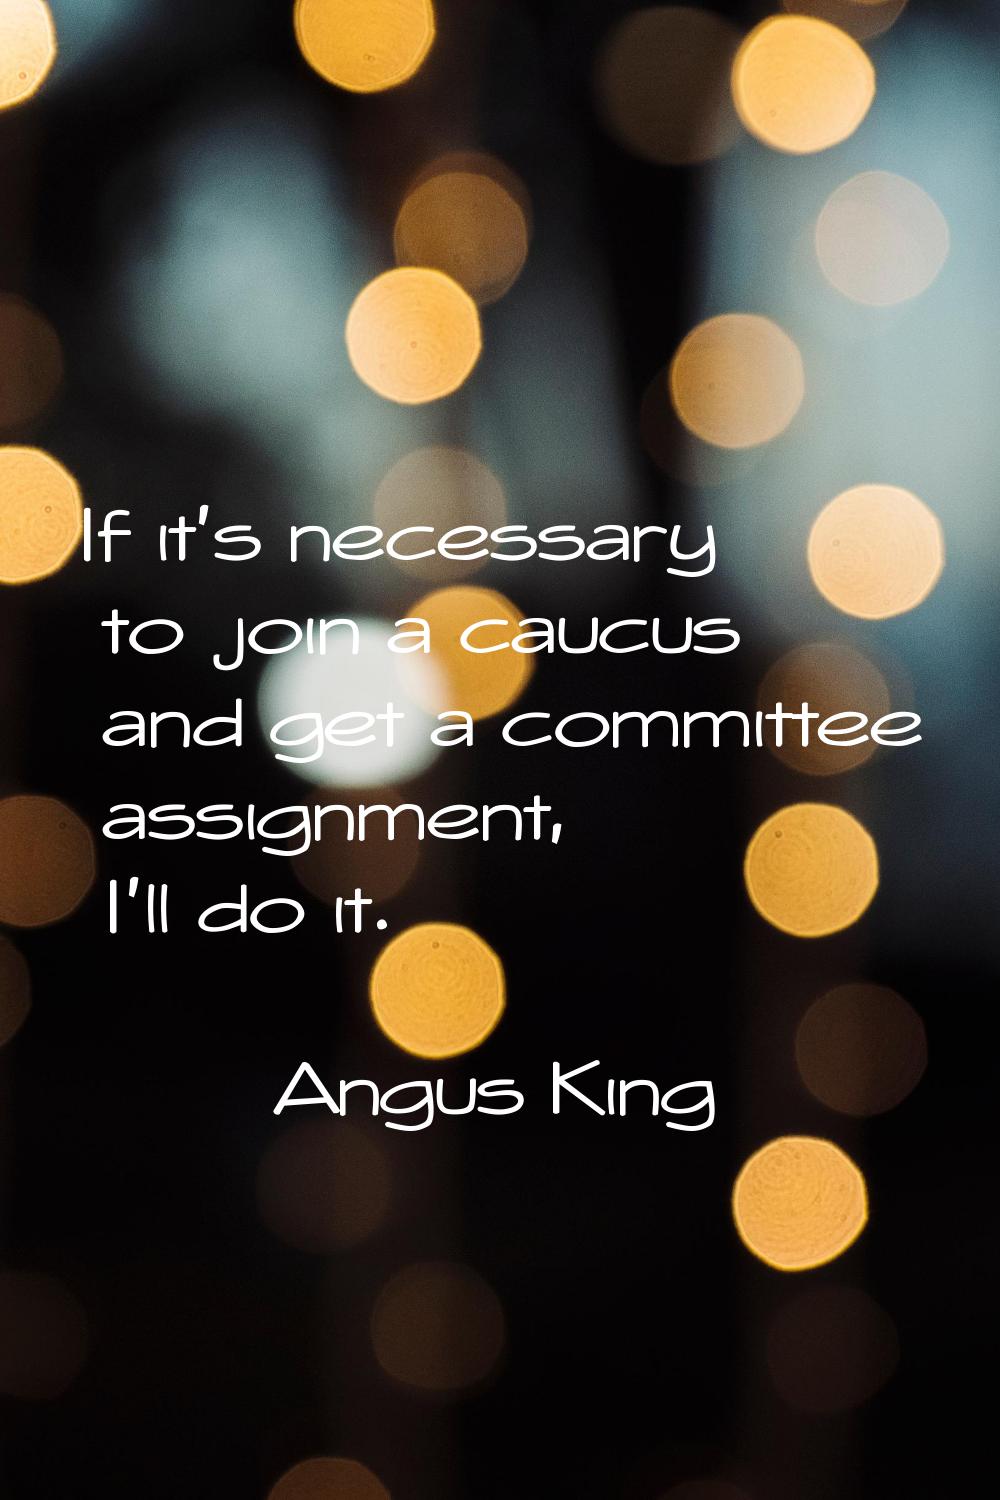 If it's necessary to join a caucus and get a committee assignment, I'll do it.